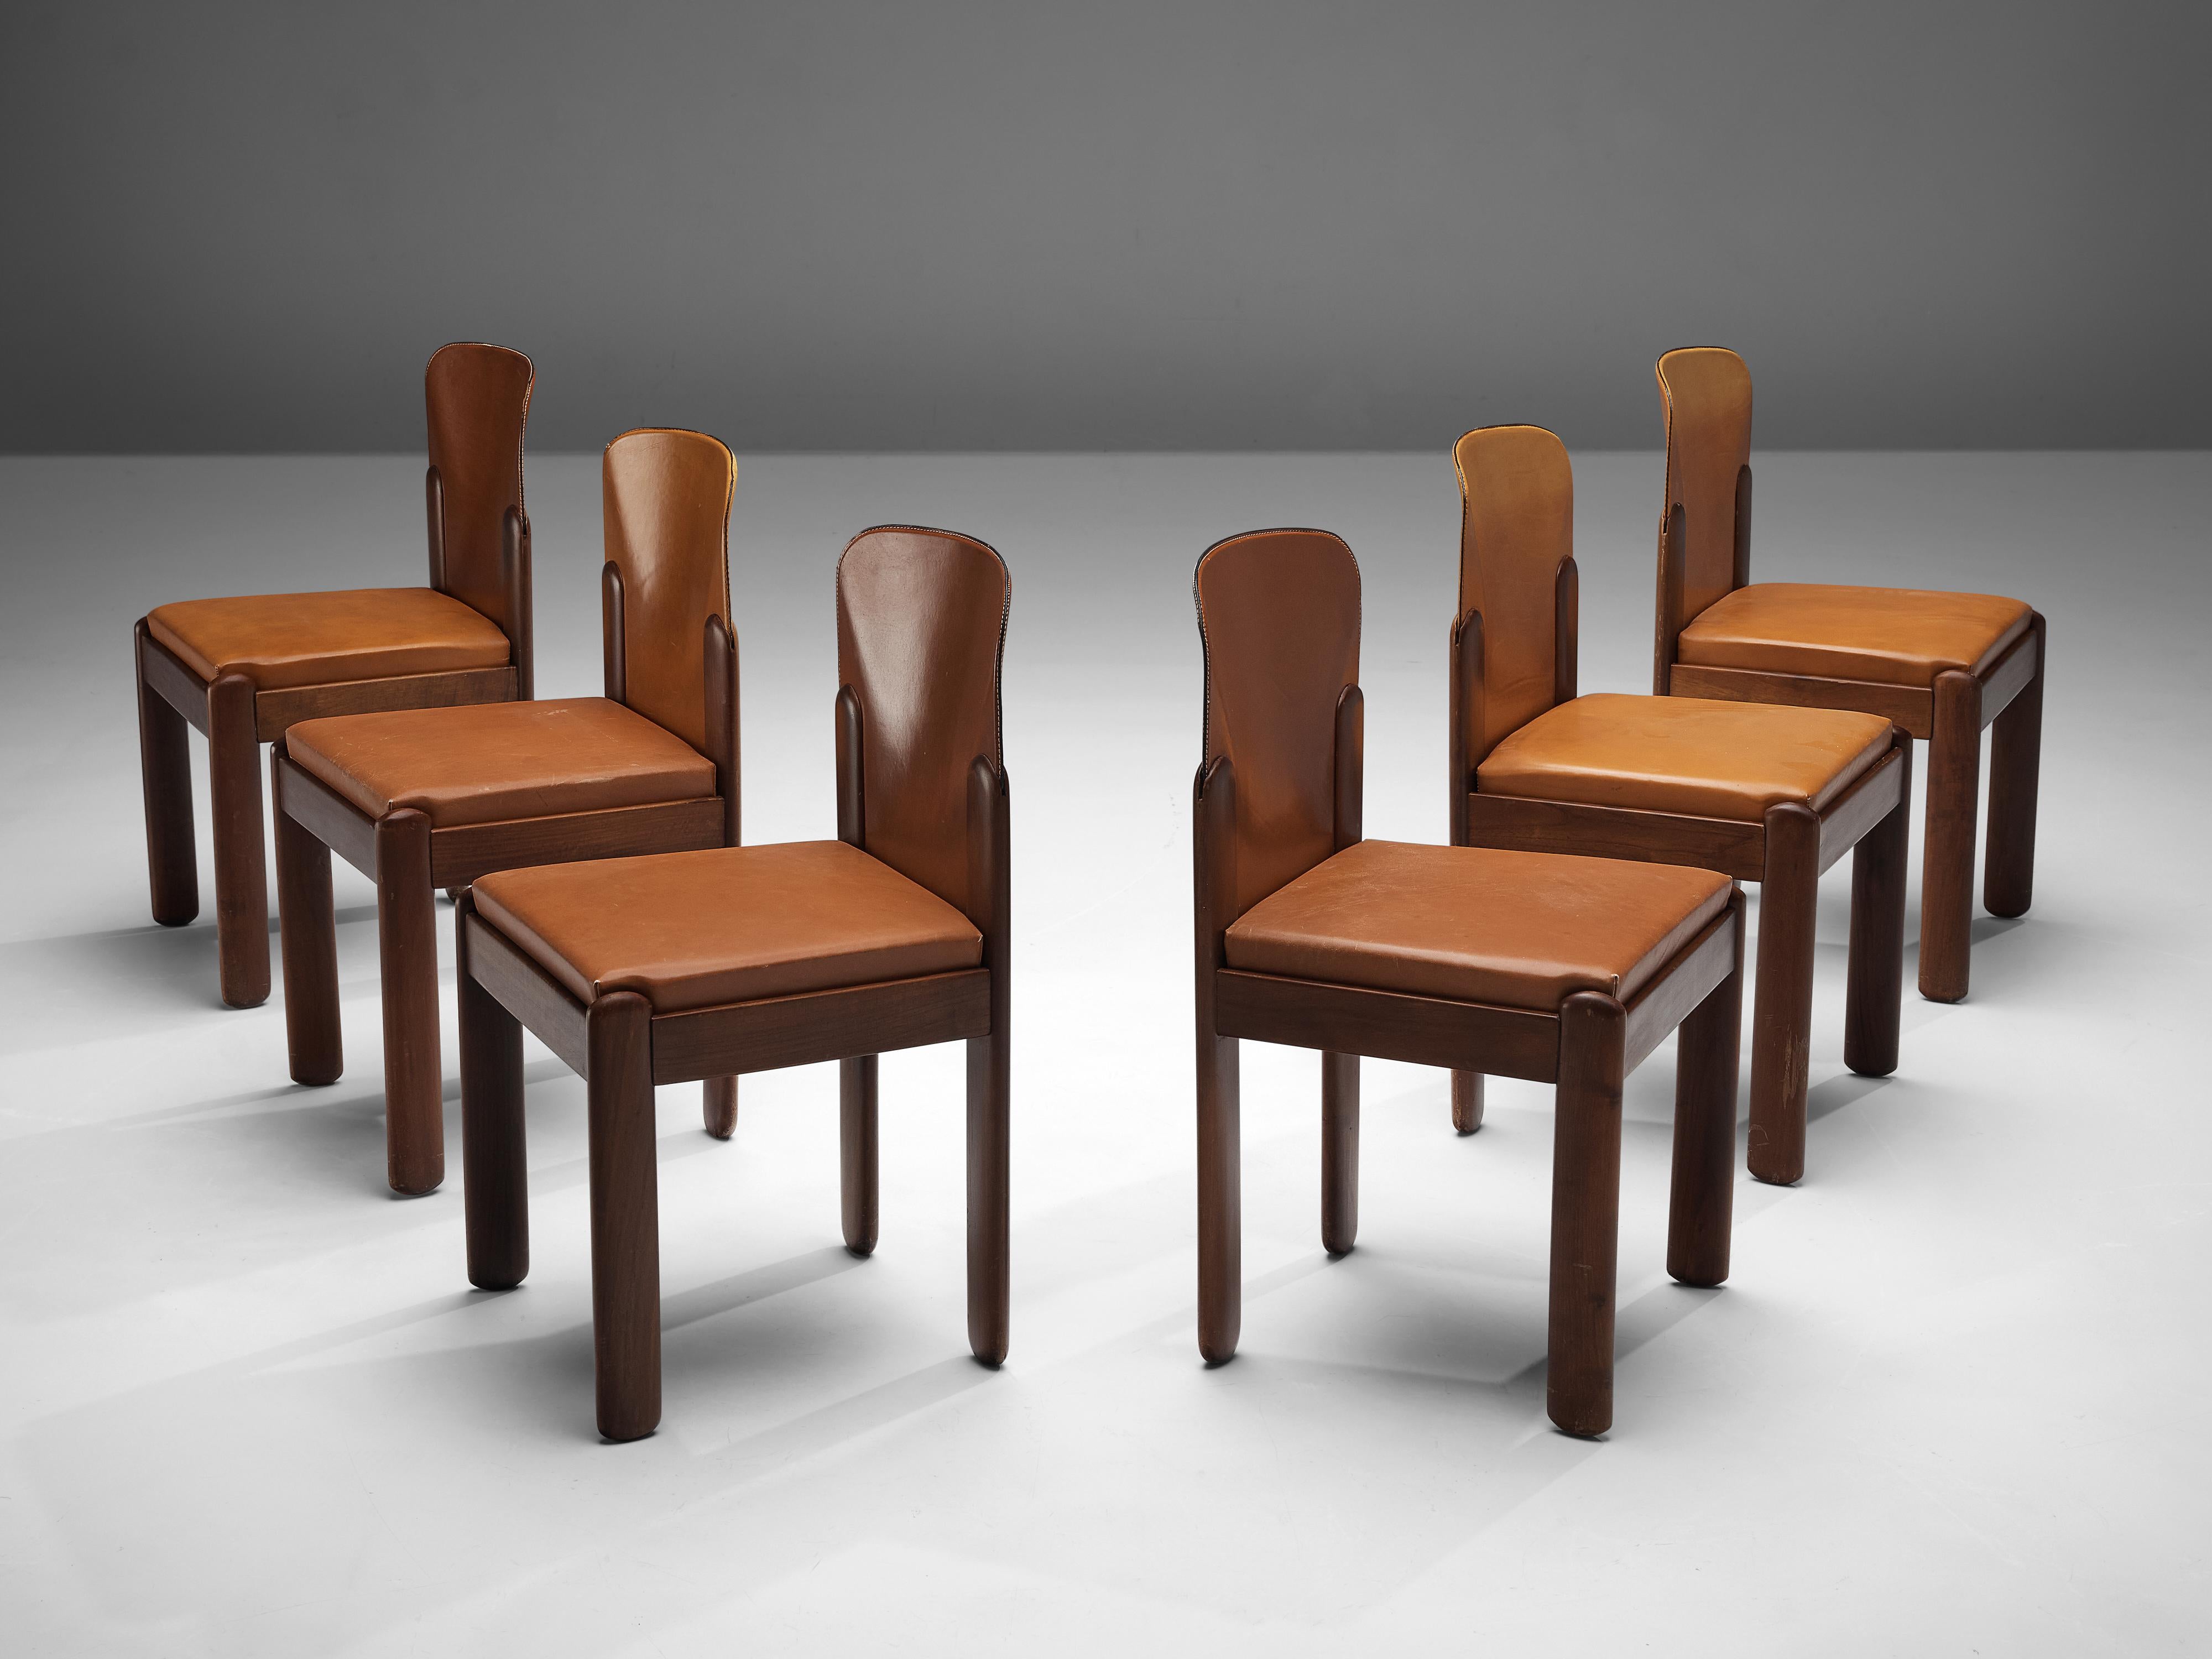 Silvio Coppola for Bernini, six dining chairs model '330', cognac leather, wood, Italy, 1960s

Wonderful set of six dining chairs by Italian designer Silvio Coppola. These aesthetically well balanced chairs strongly convince with the contrast